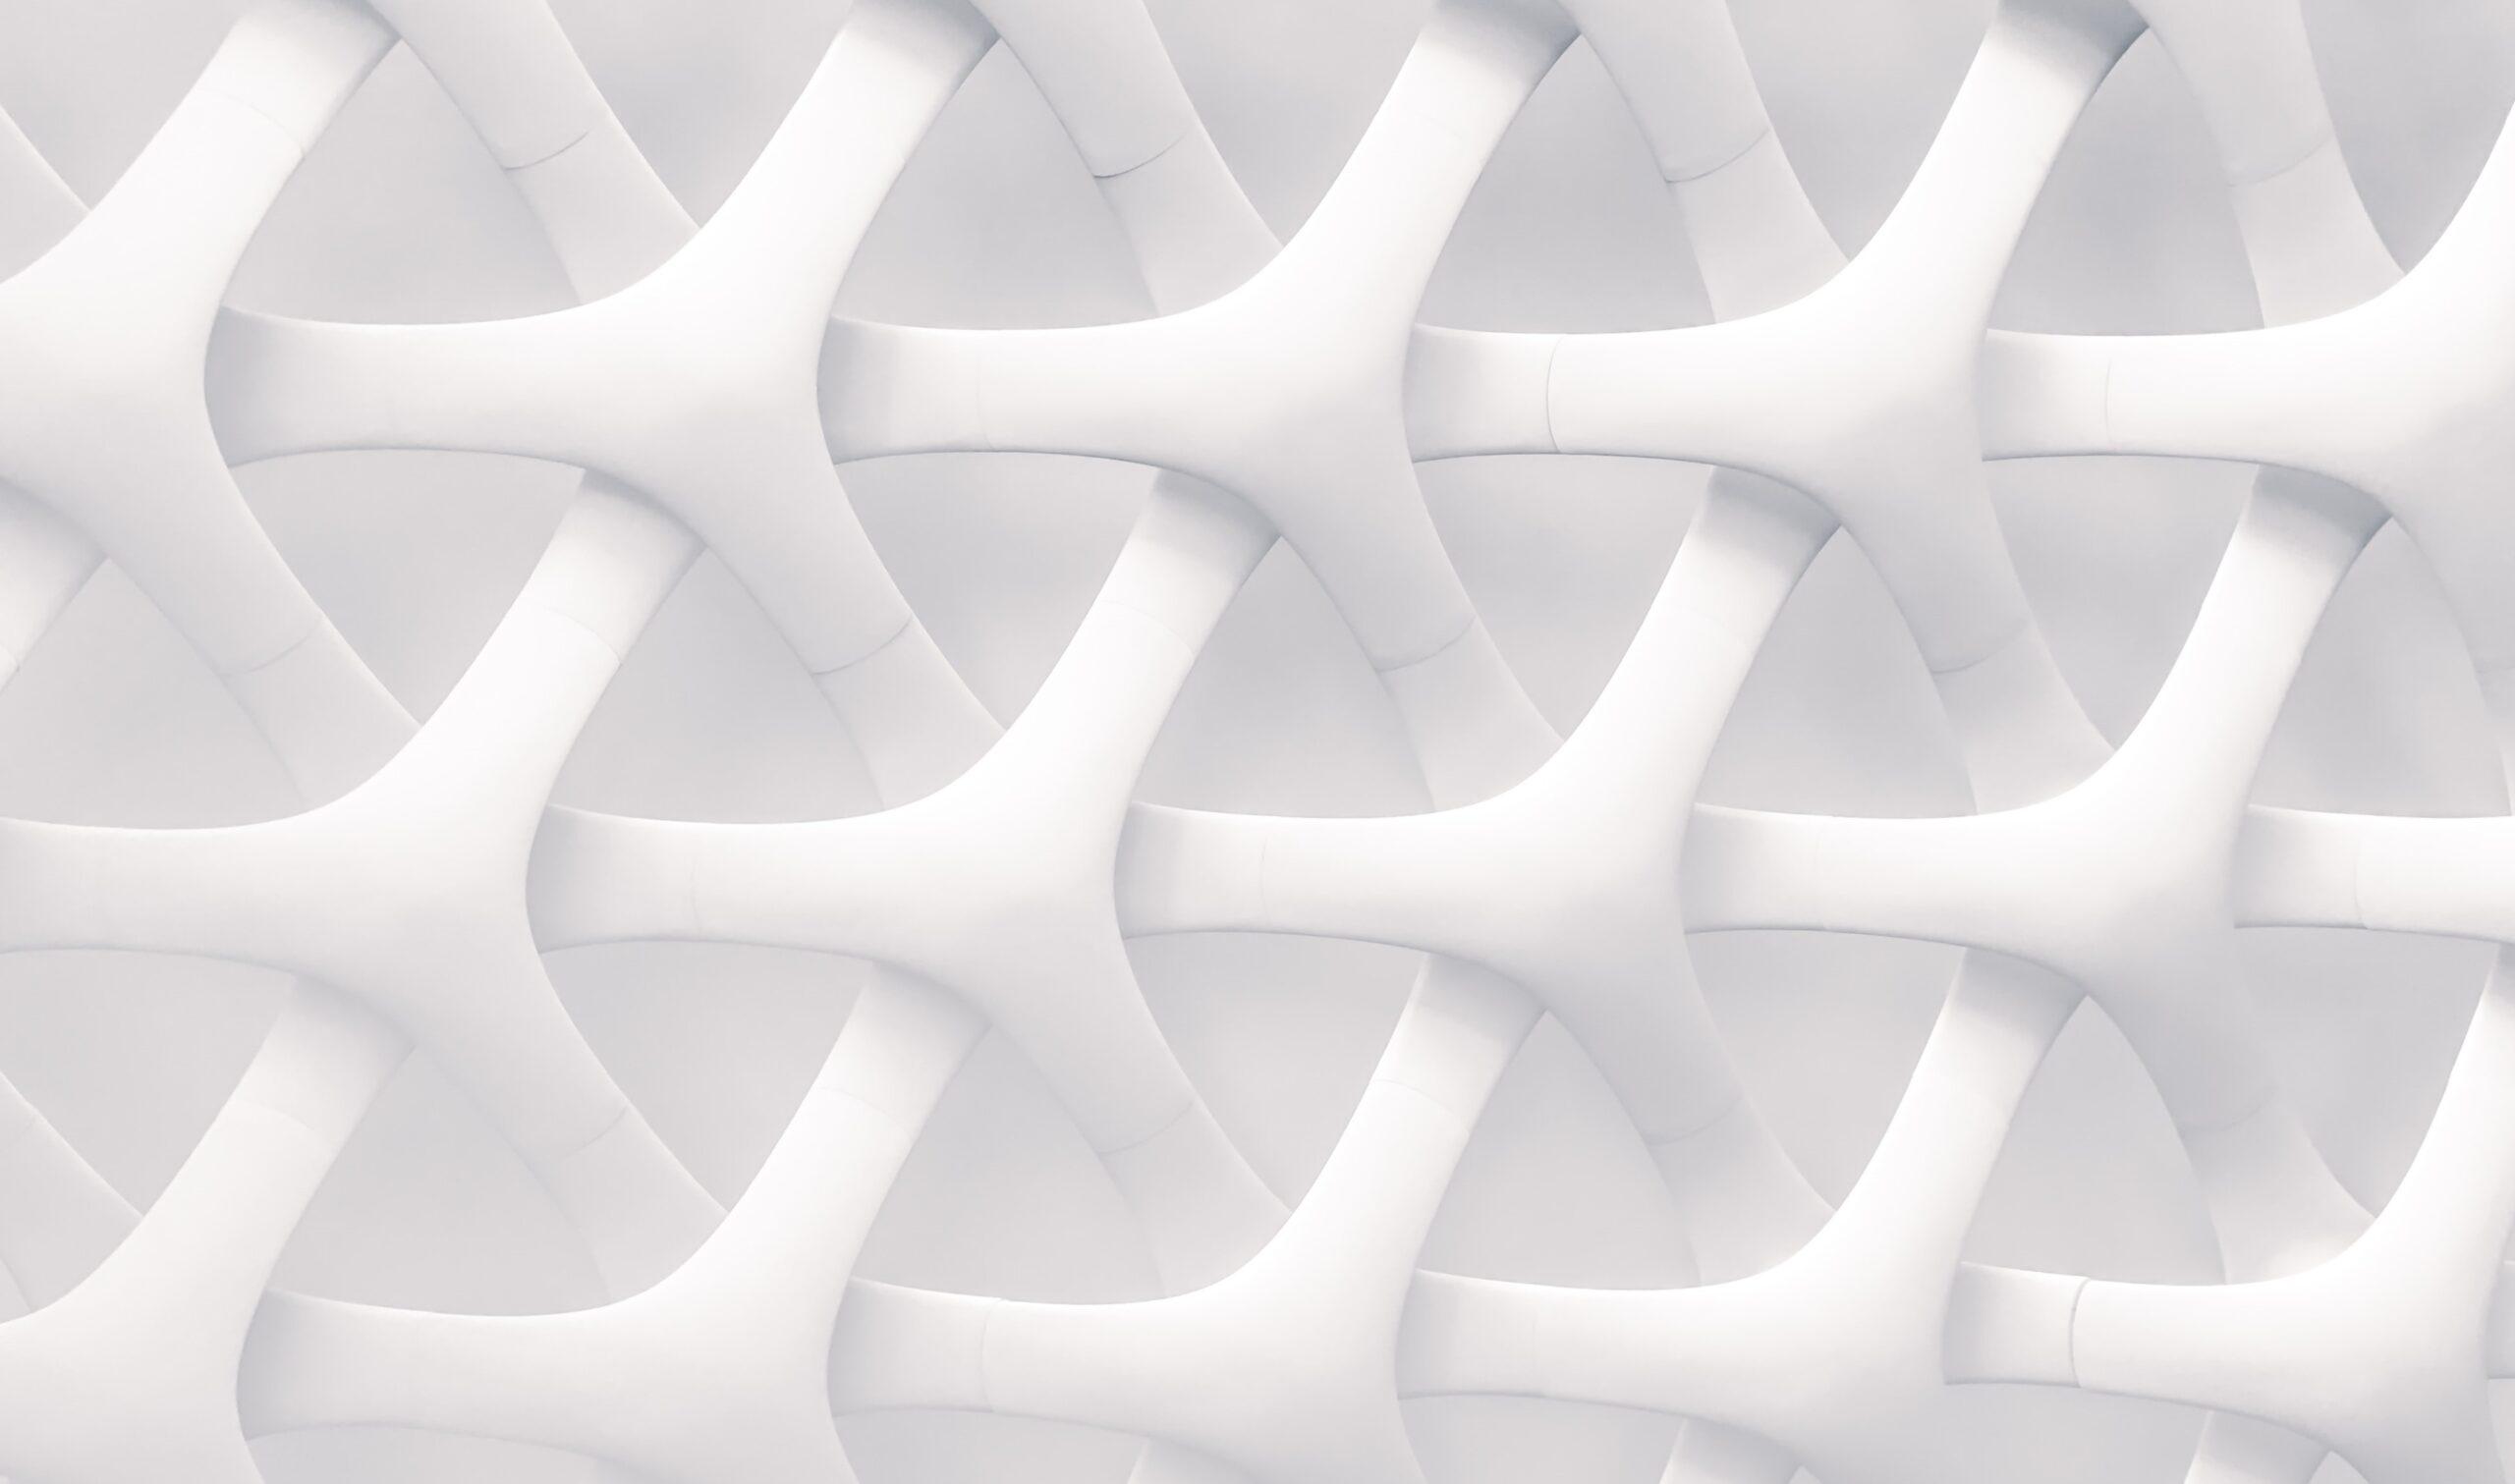 White image of shapes interwoven as part of an article about the link between branding and design.